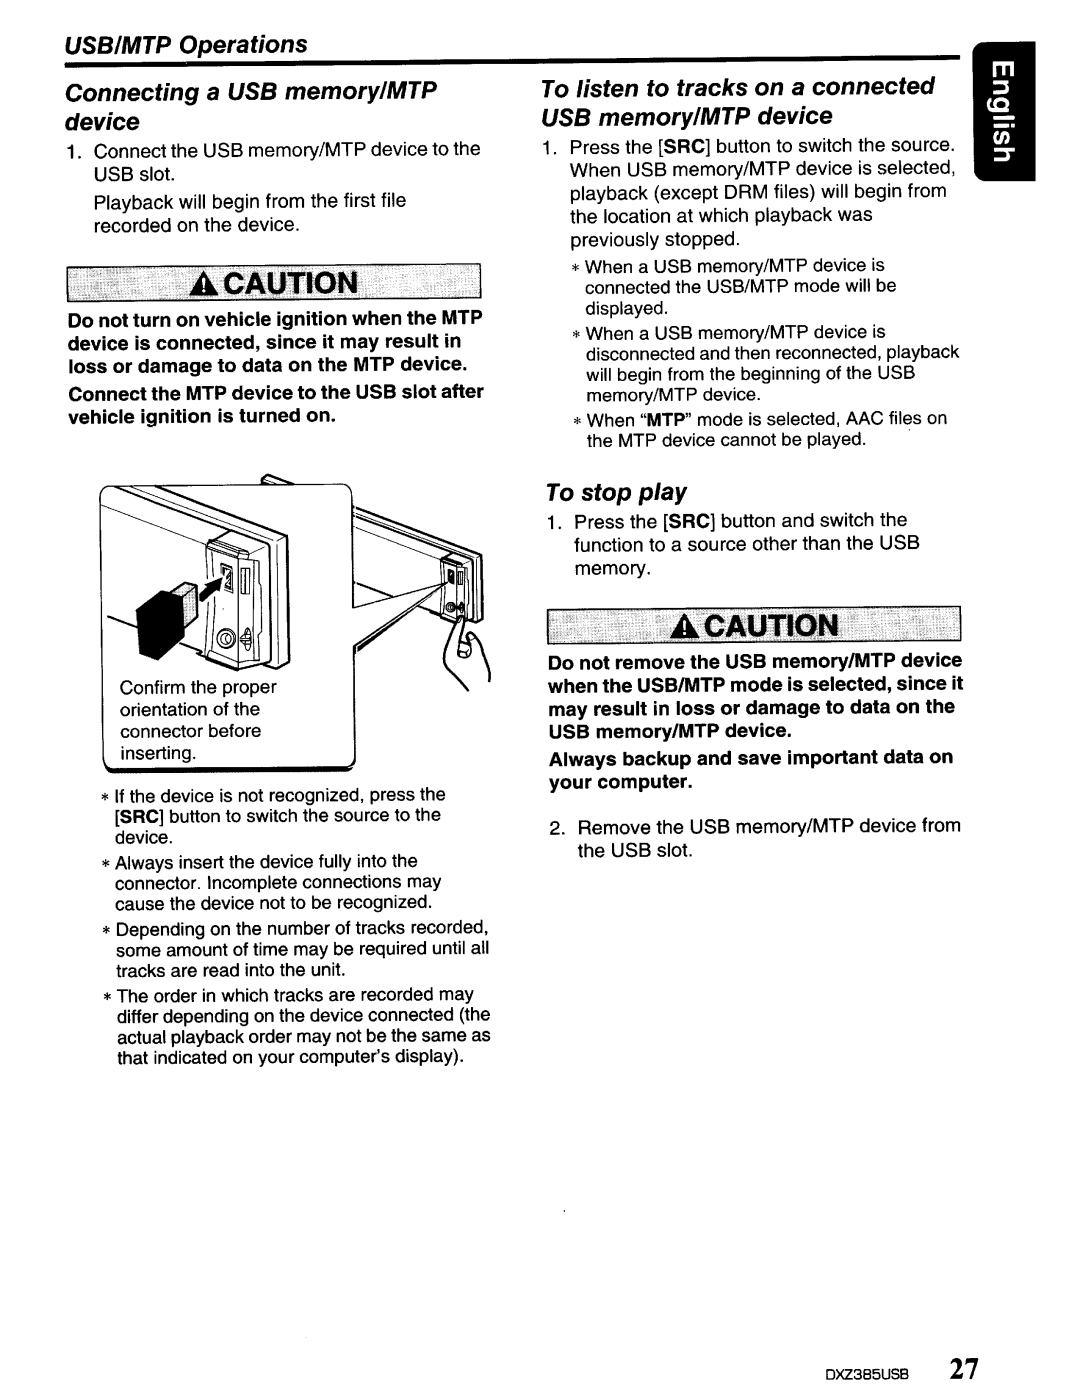 Clarion DXZ385US8 owner manual USBIMTP Operations, Connecting a USB memorylMTP device, To stop play 